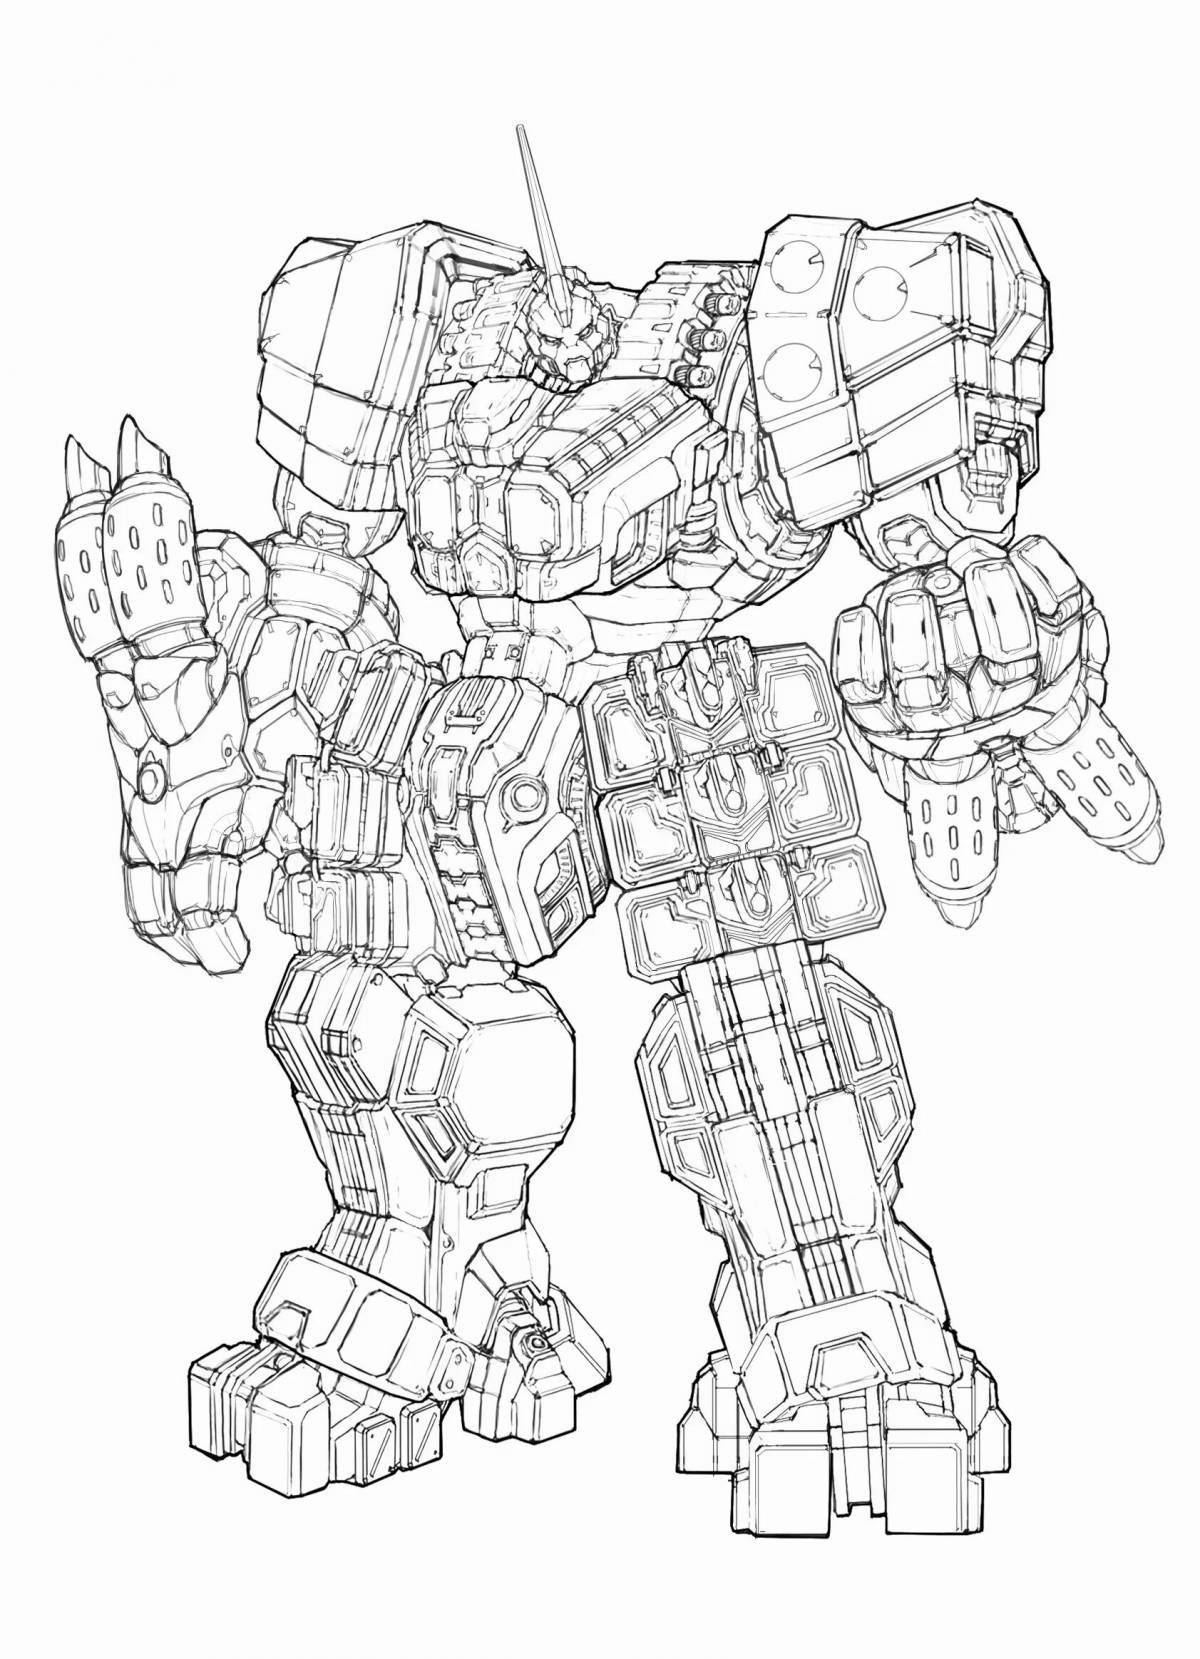 Glowing Pacific Rim coloring page